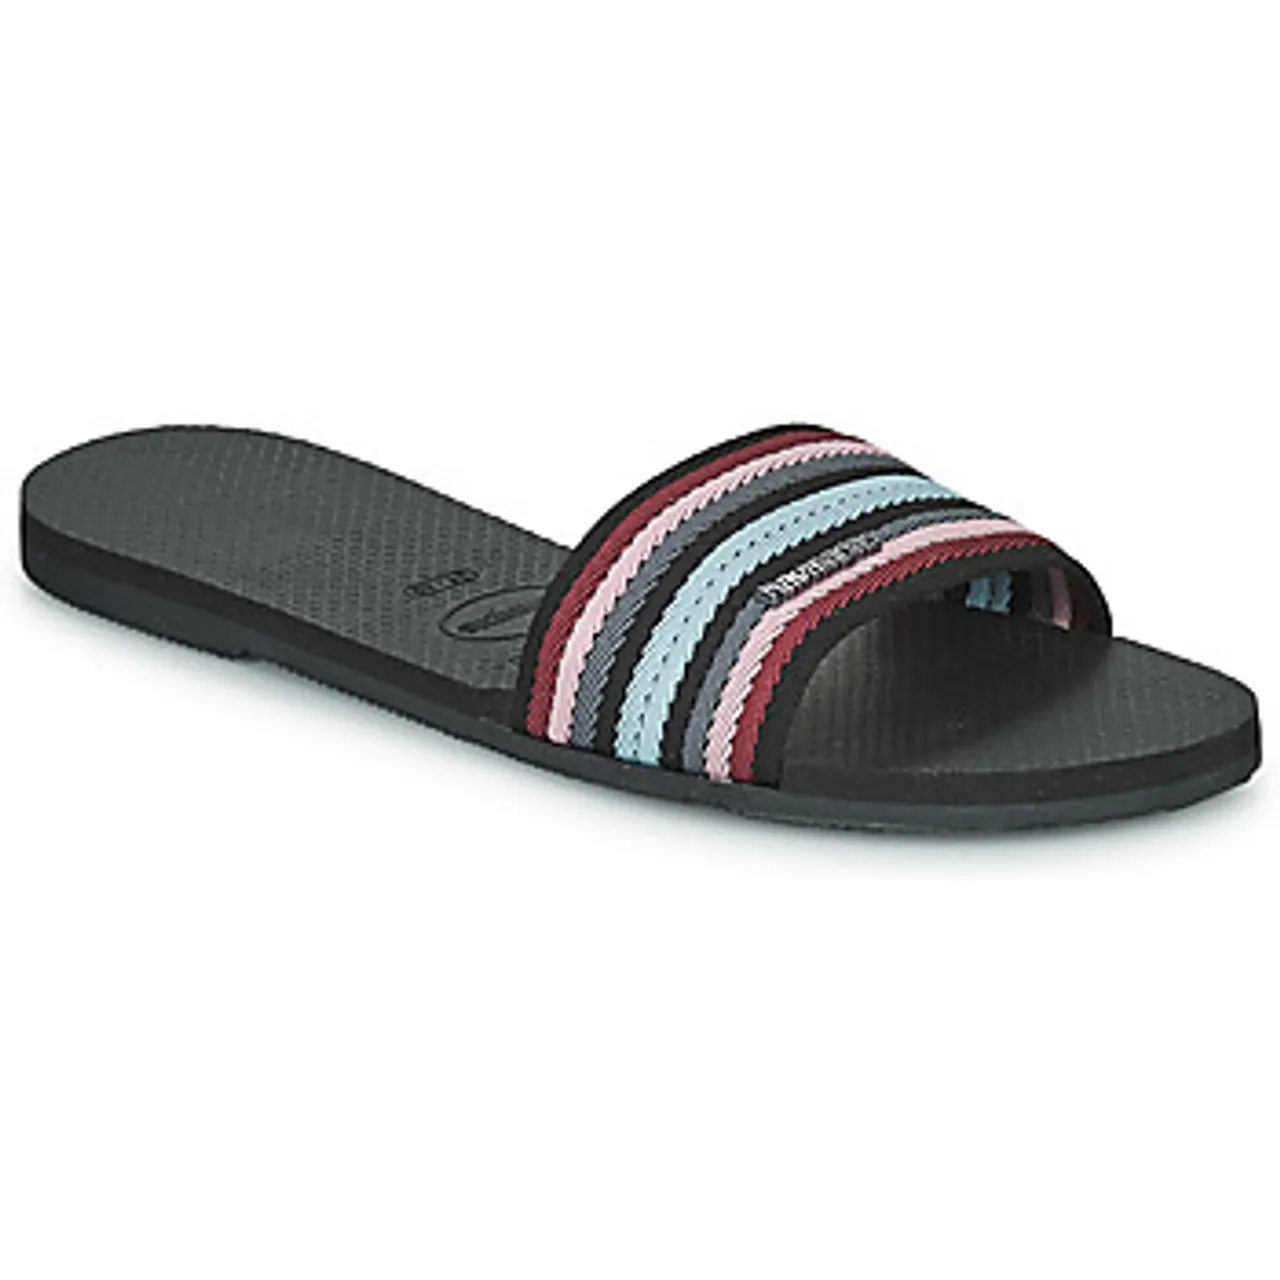 Havaianas  YOU MALTA  women's Mules / Casual Shoes in Black